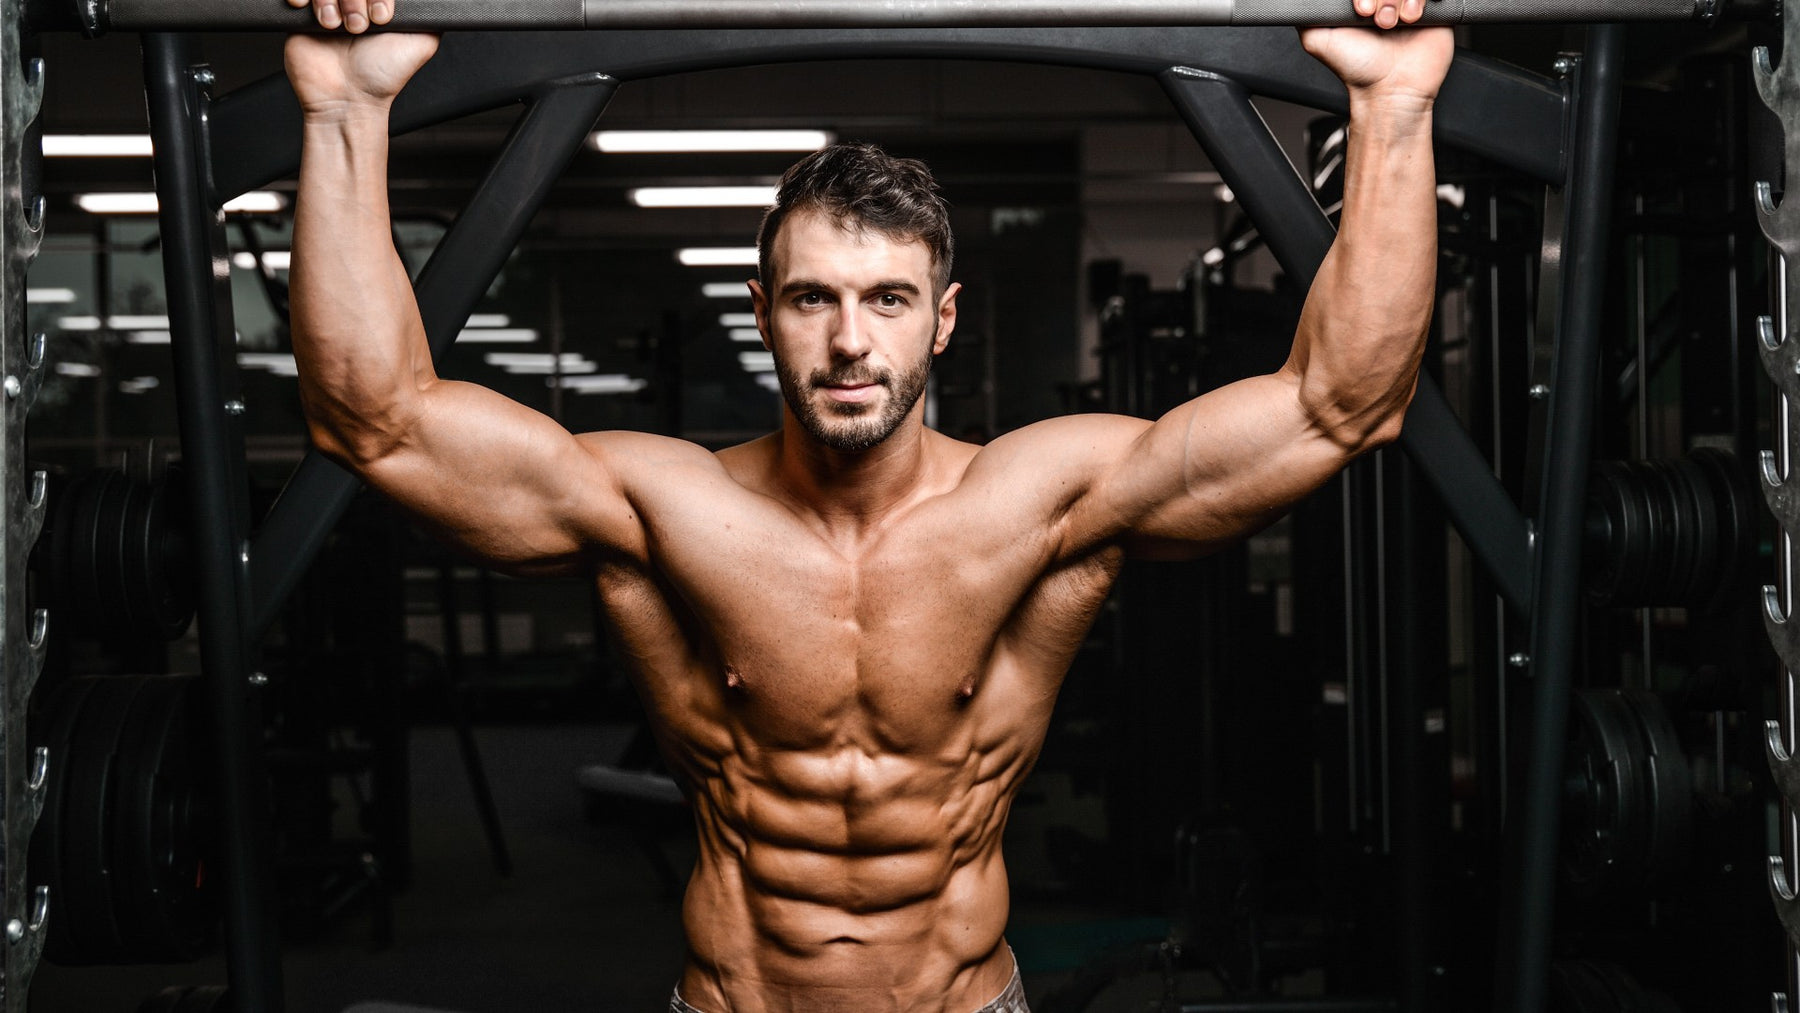 Learn How To Get Six Pack Abs Just By Eating